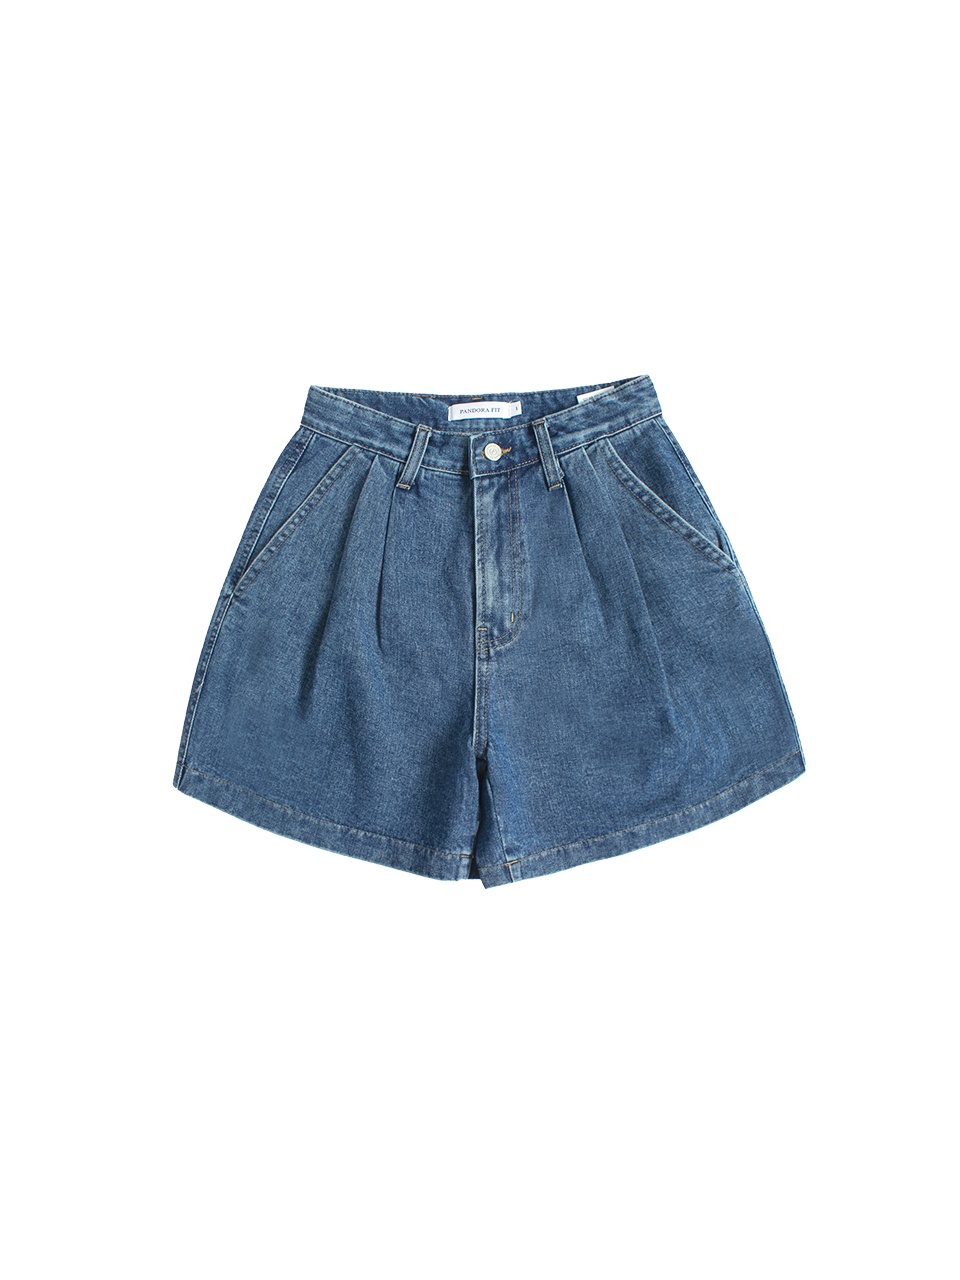 [SHORTS] Blossom Jeans